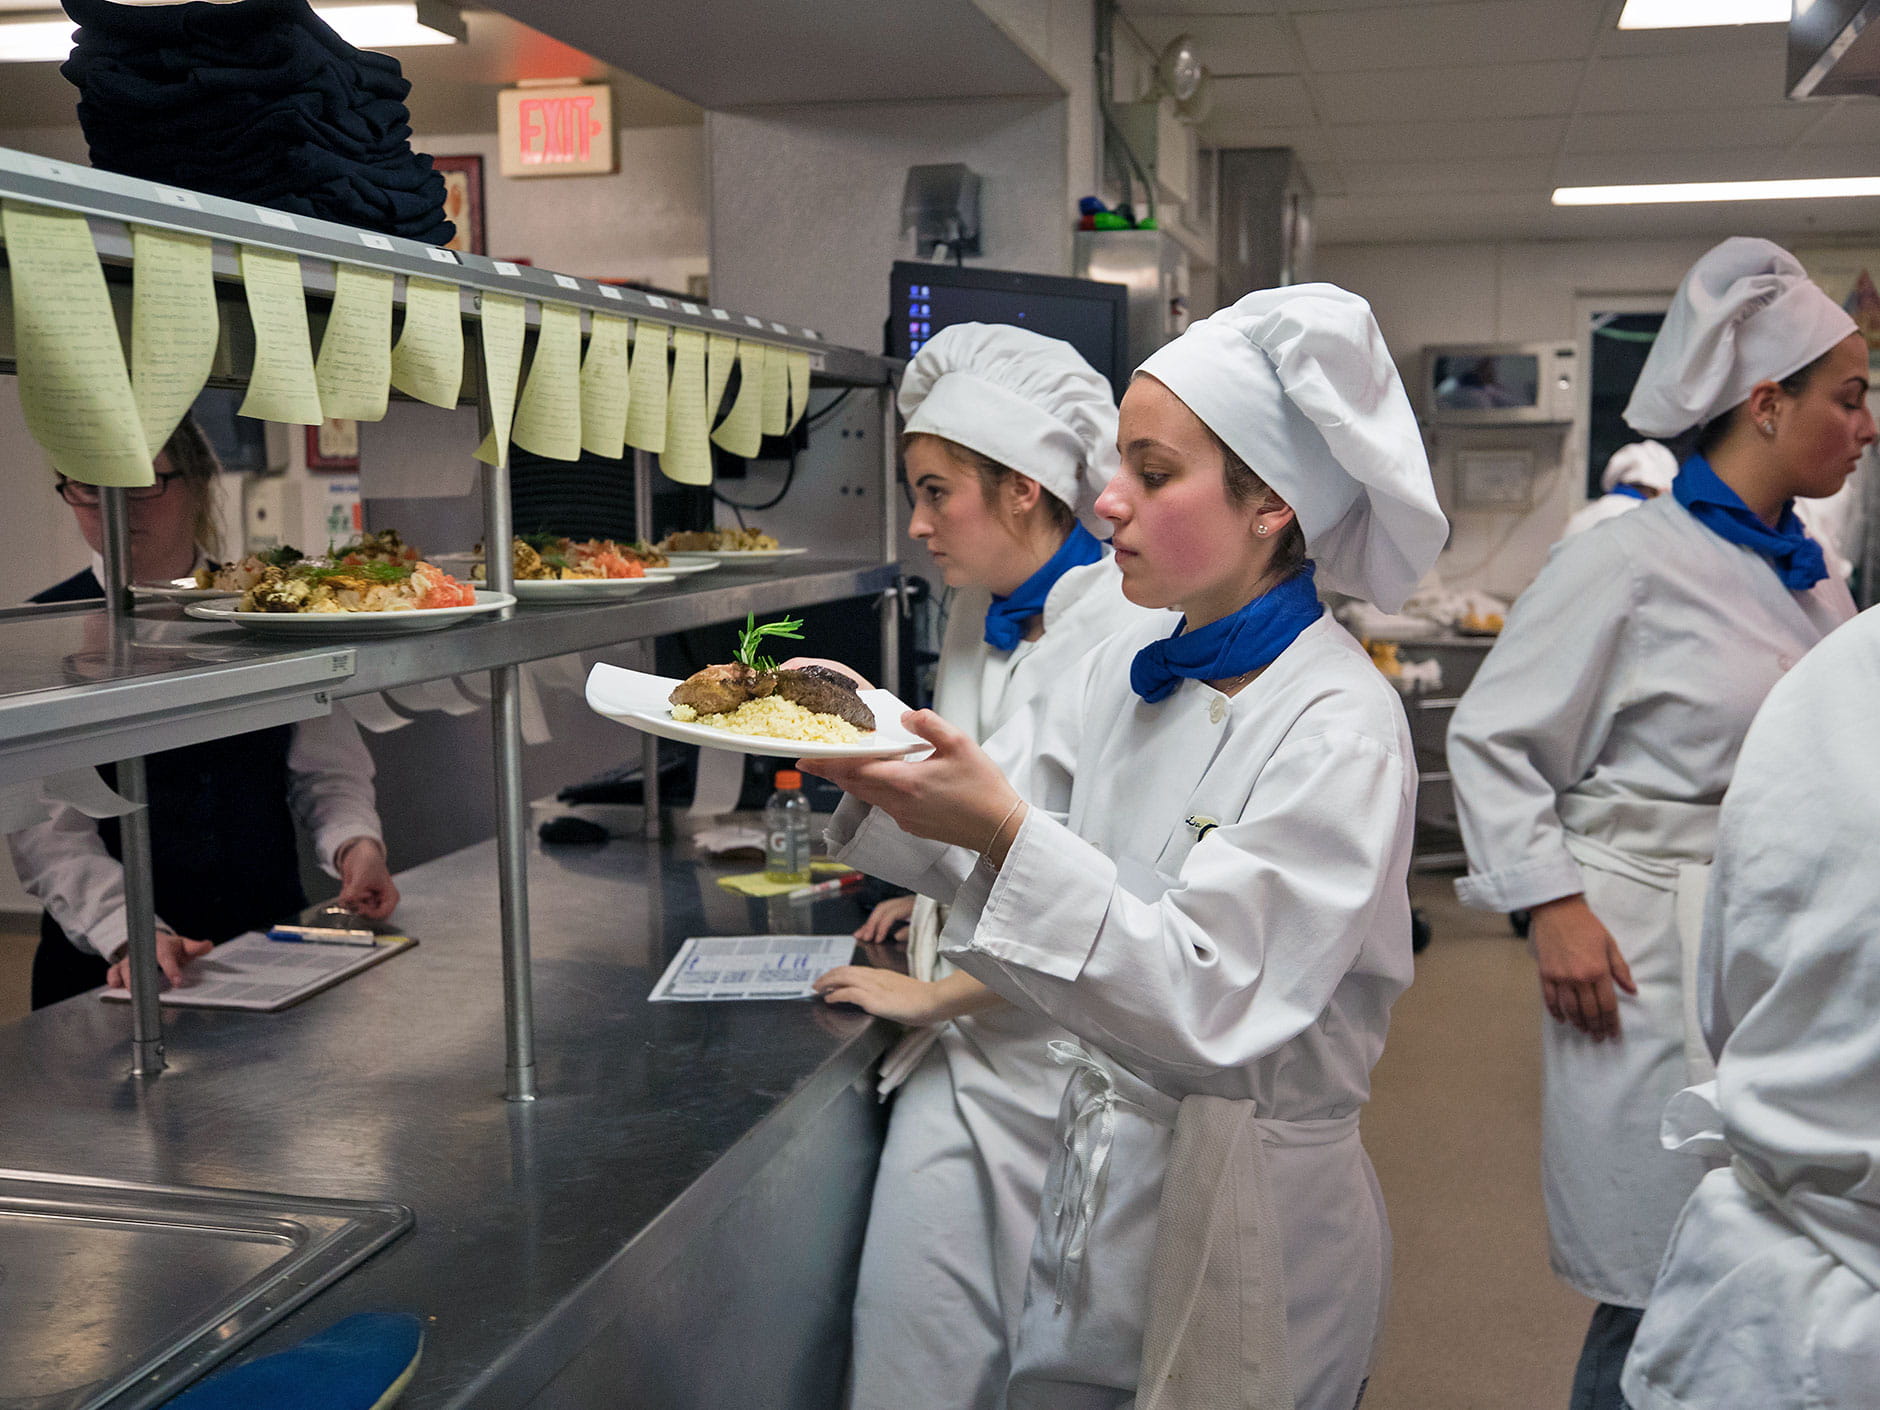 Students working in the kitchen at La Chanterelle